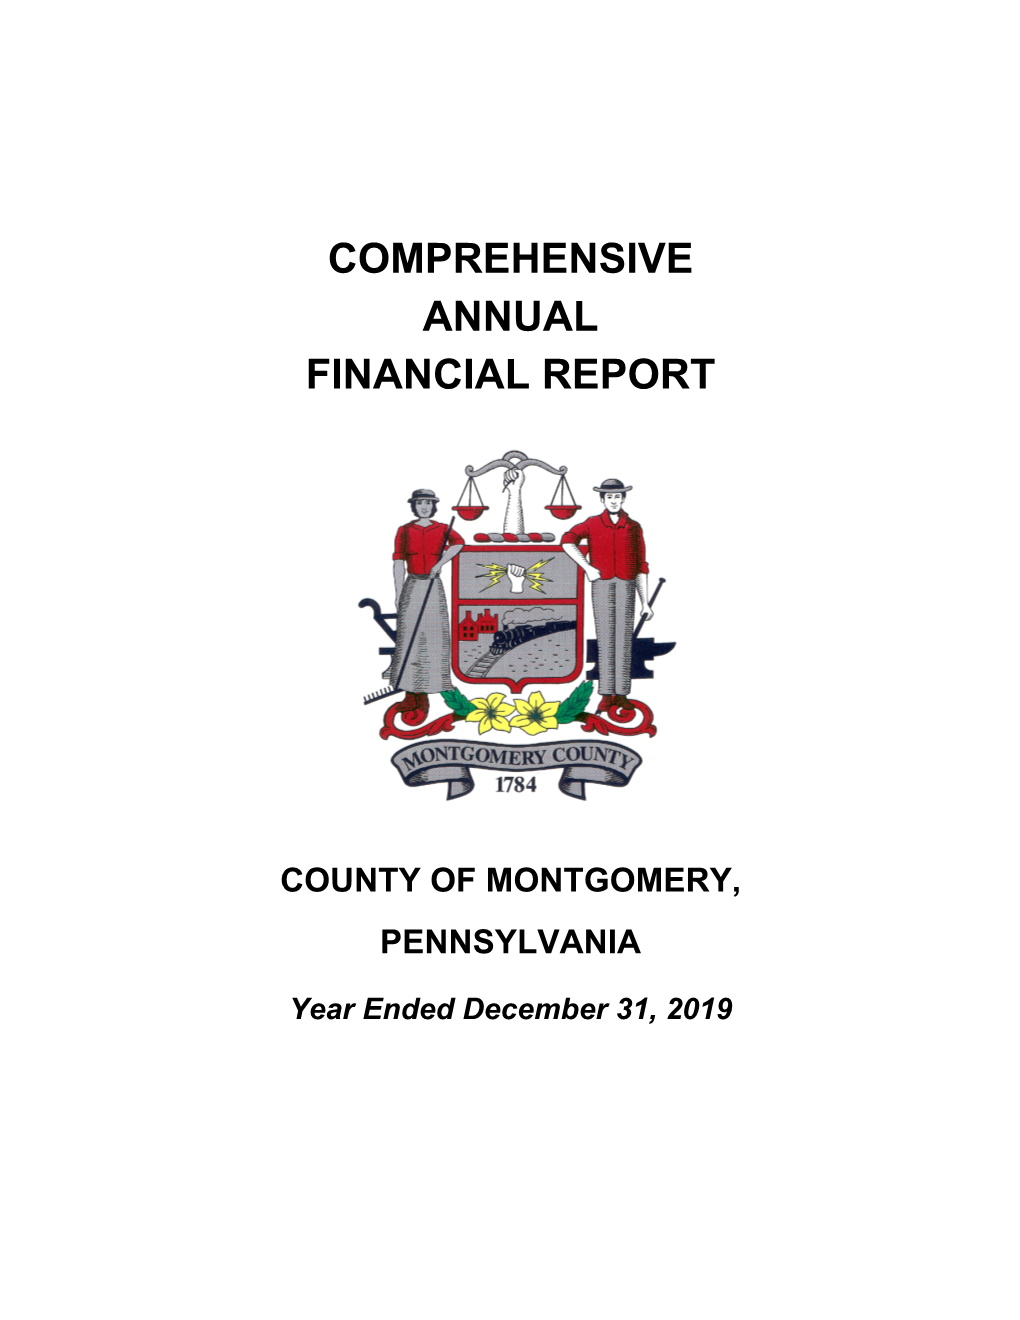 County's 2019 Comprehensive Annual Financial Report